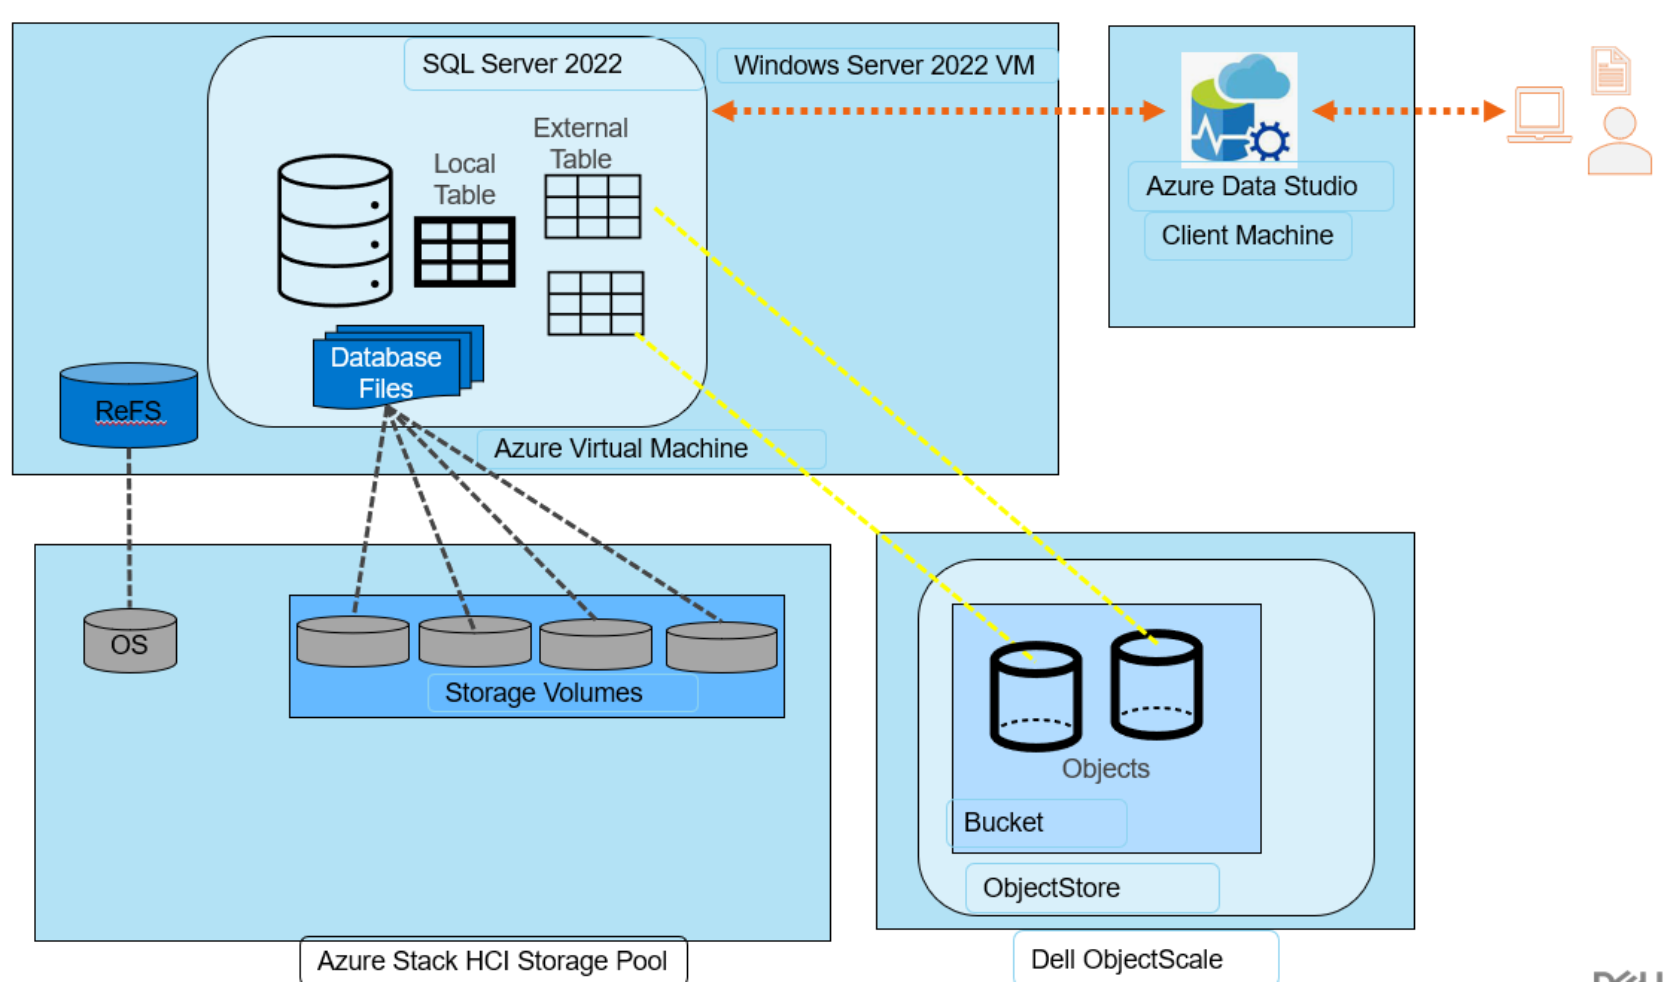 This shows the storage layer architecture for this solution.